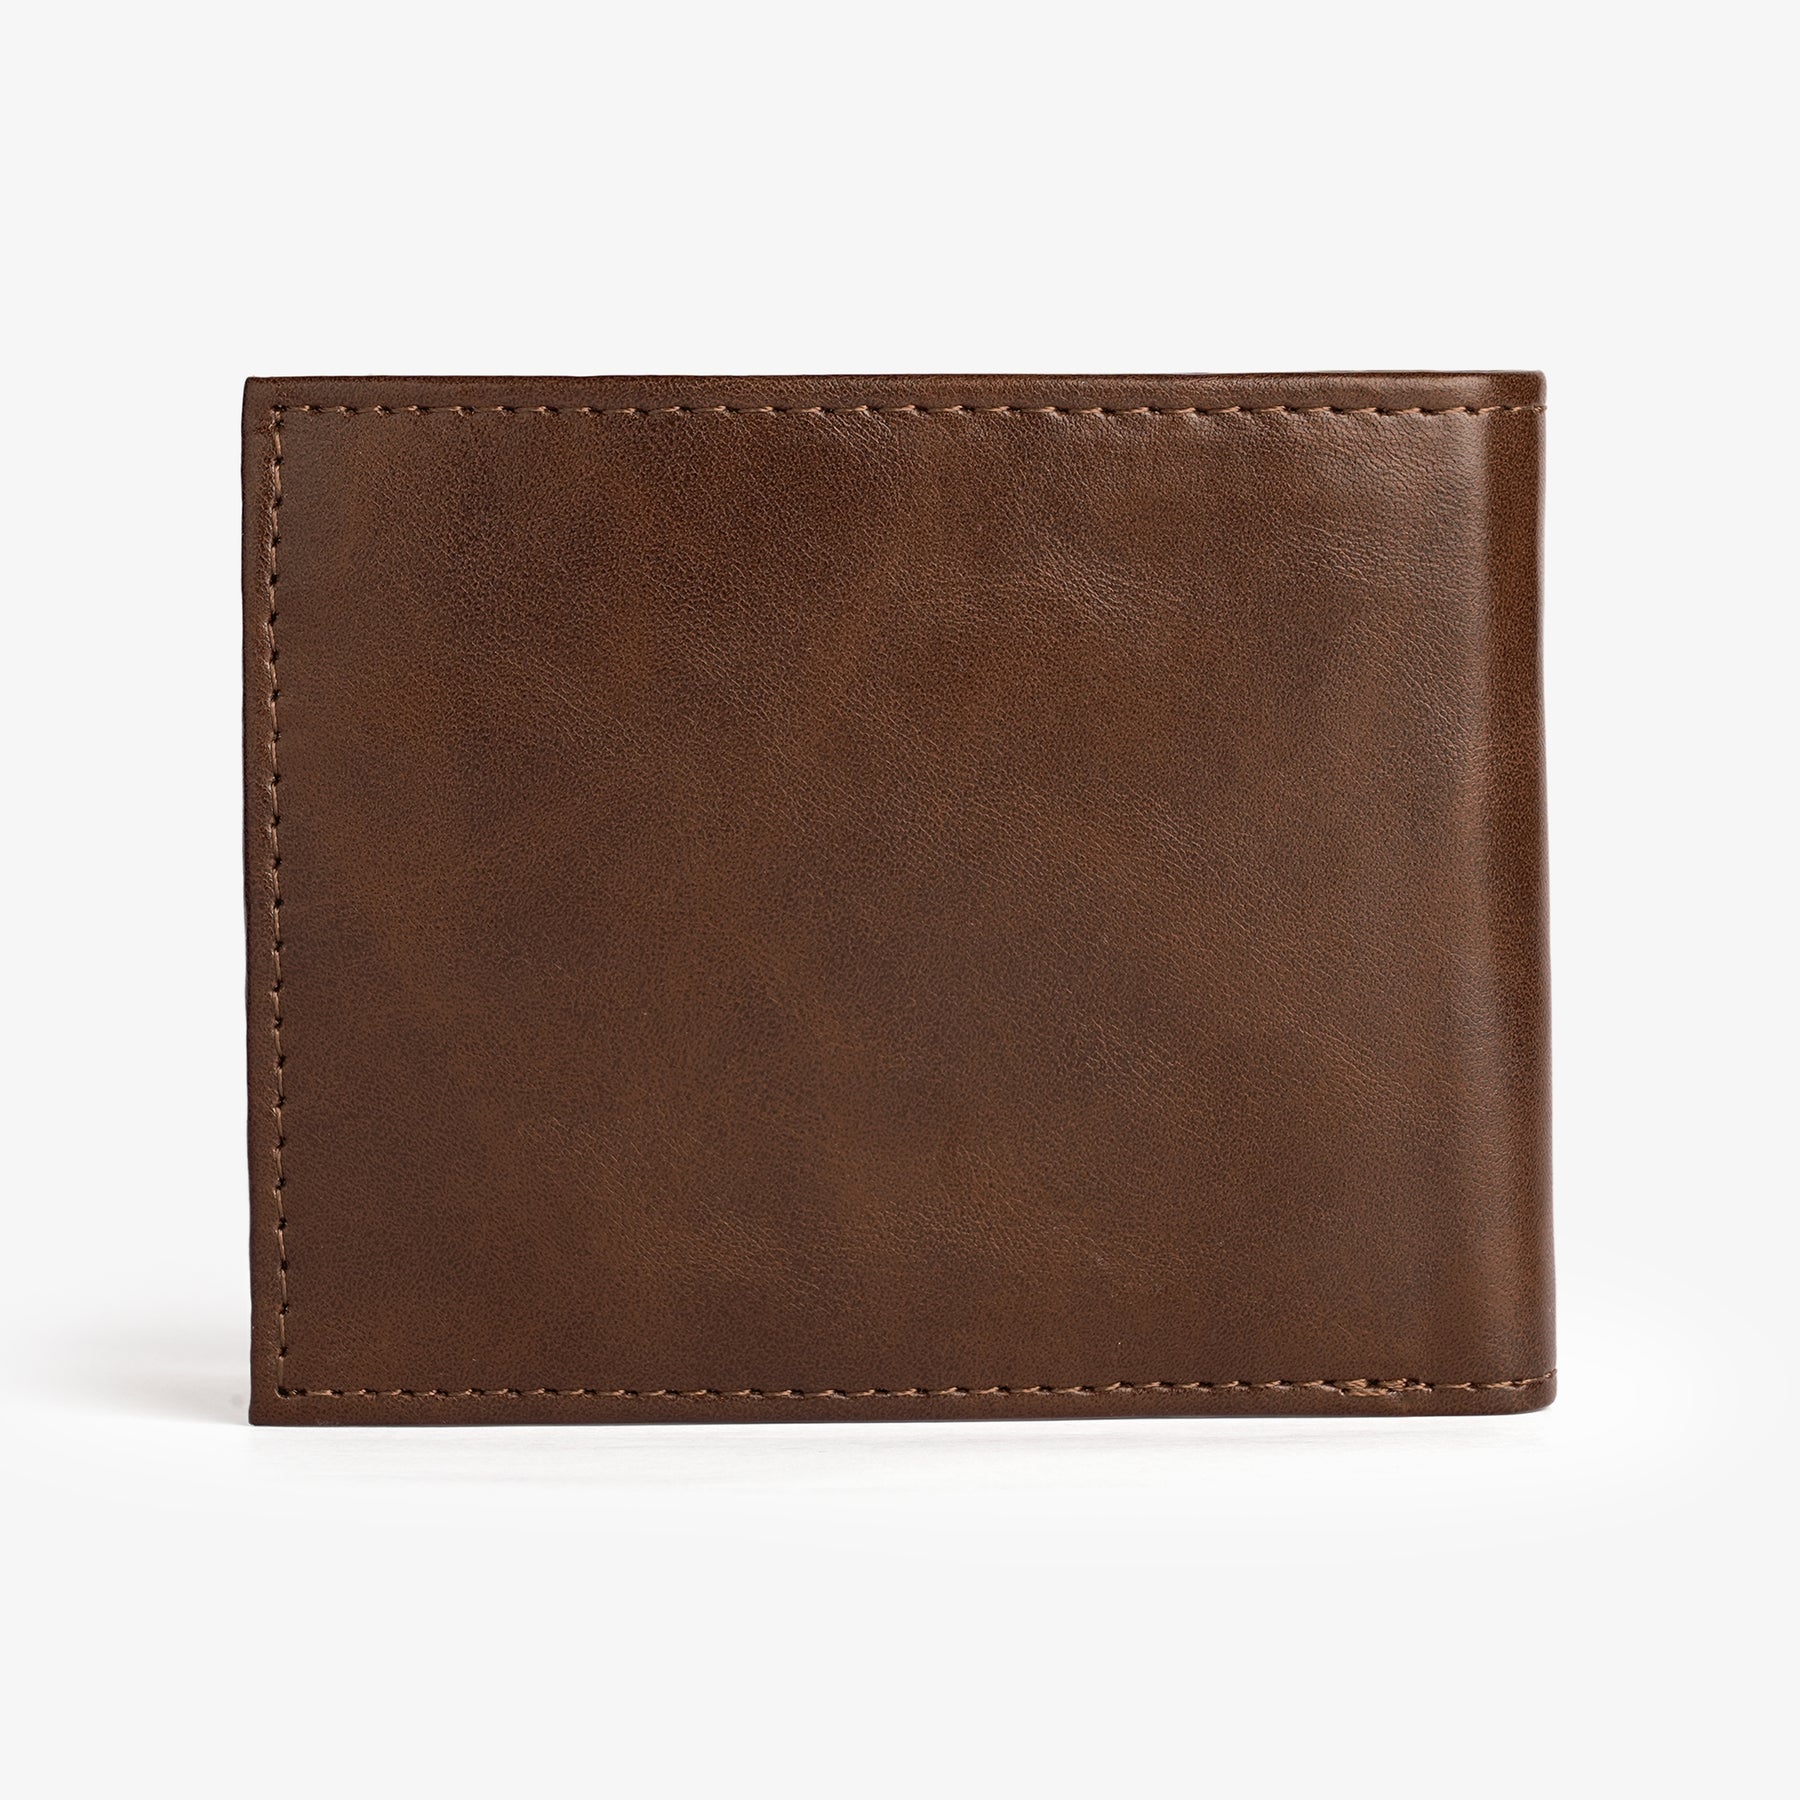 Personalised Mens Wallet with Charm - Chocolate Brown